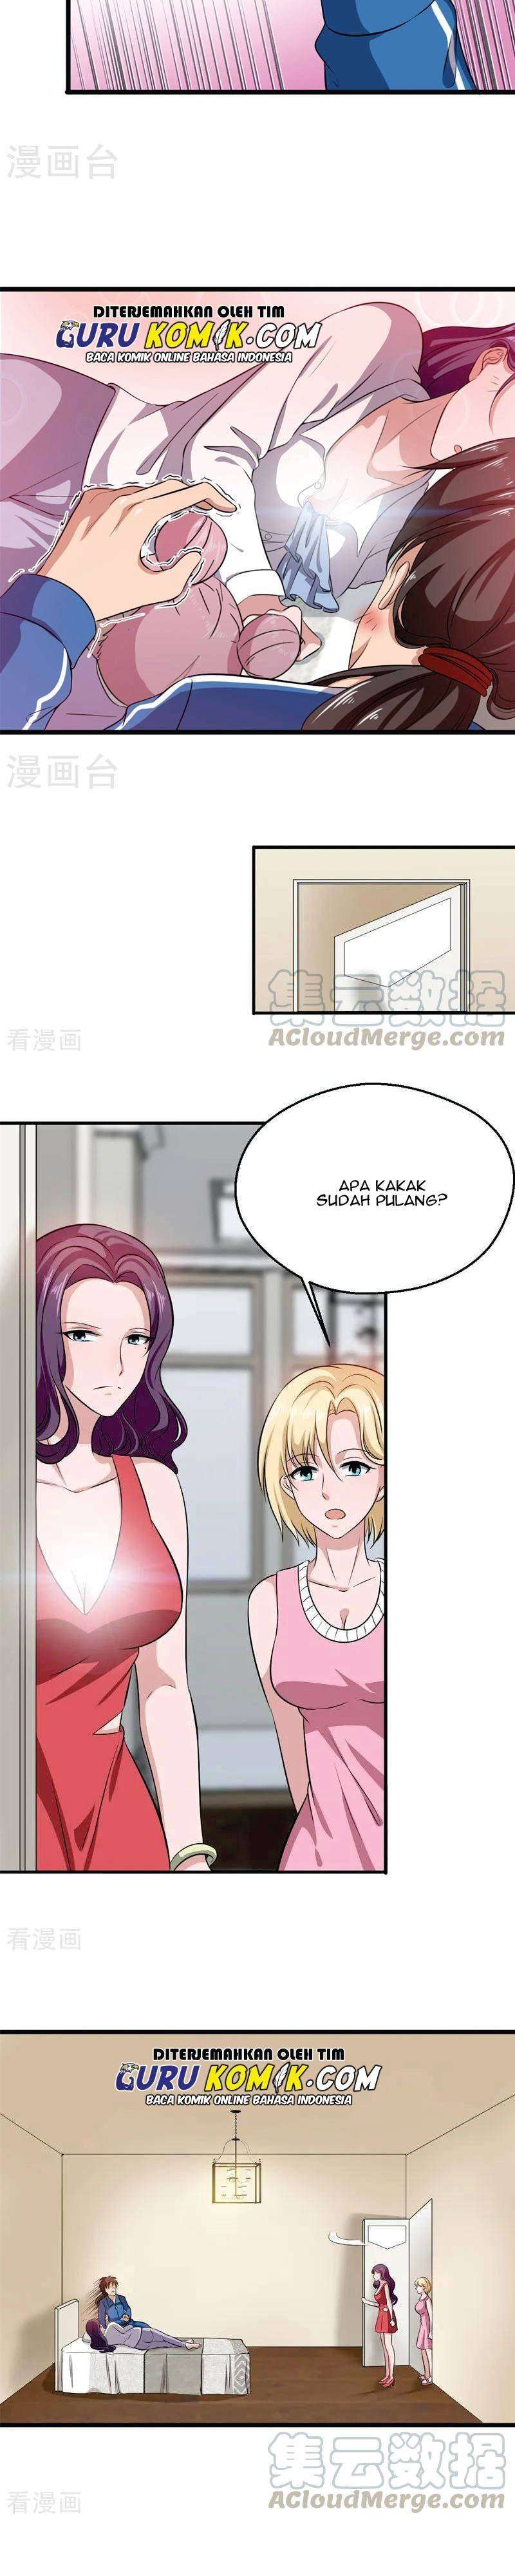 Close Mad Doctor Chapter 18-23